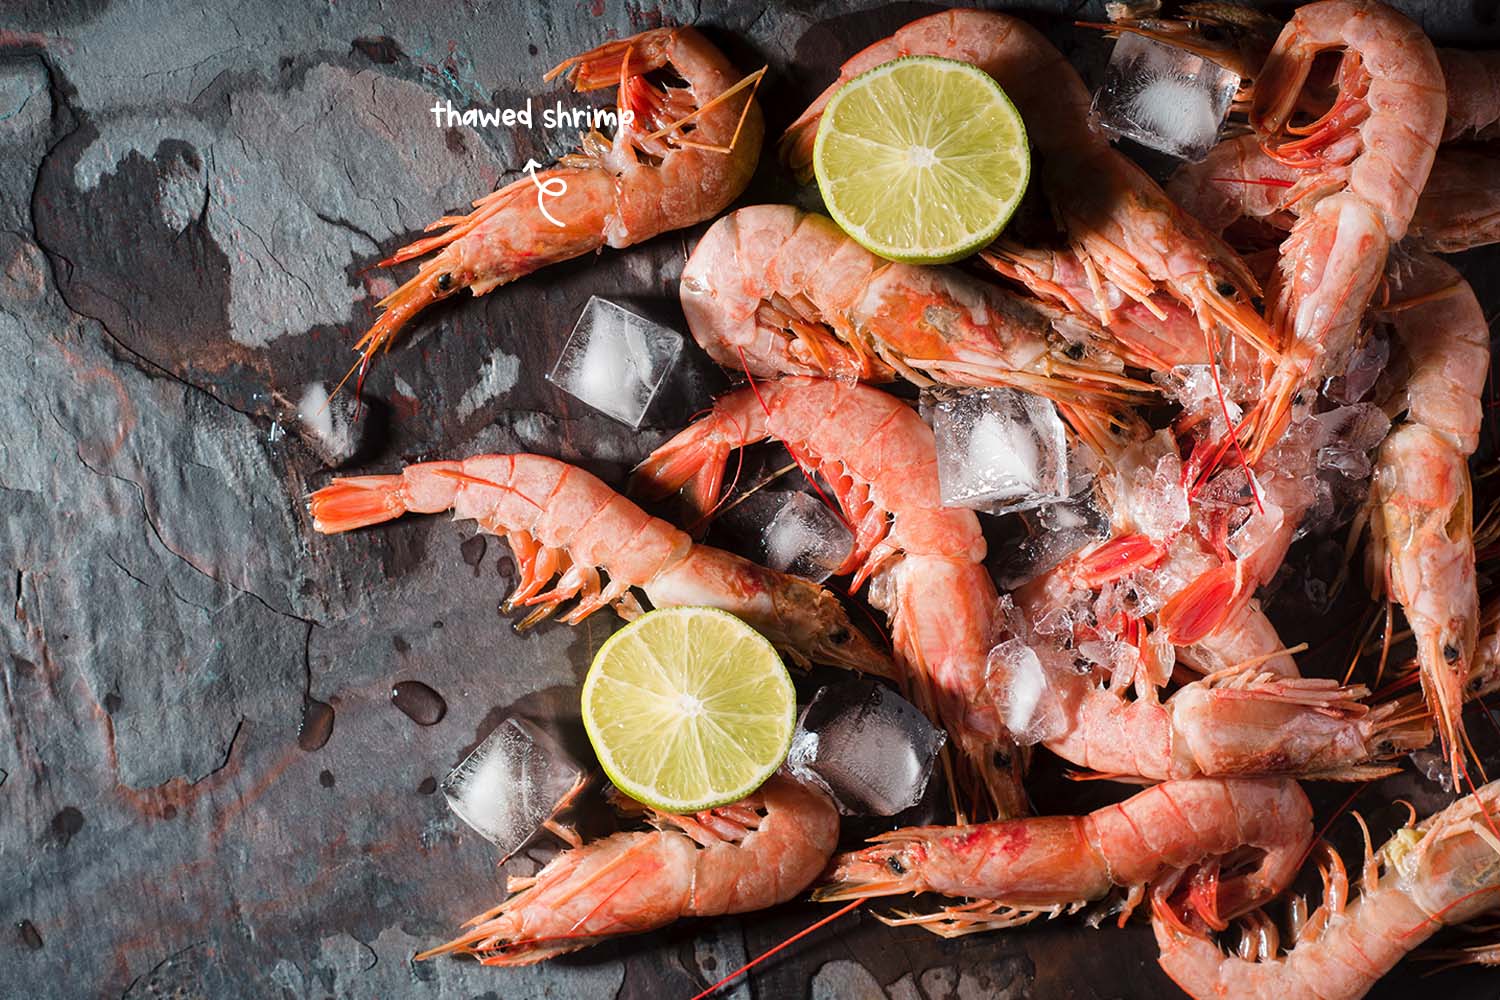 Shrimp freezes excellently, either cooked or uncooked. Regarding defrosting, it’s best in doing so in your fridge to stop any bad bacteria from developing.